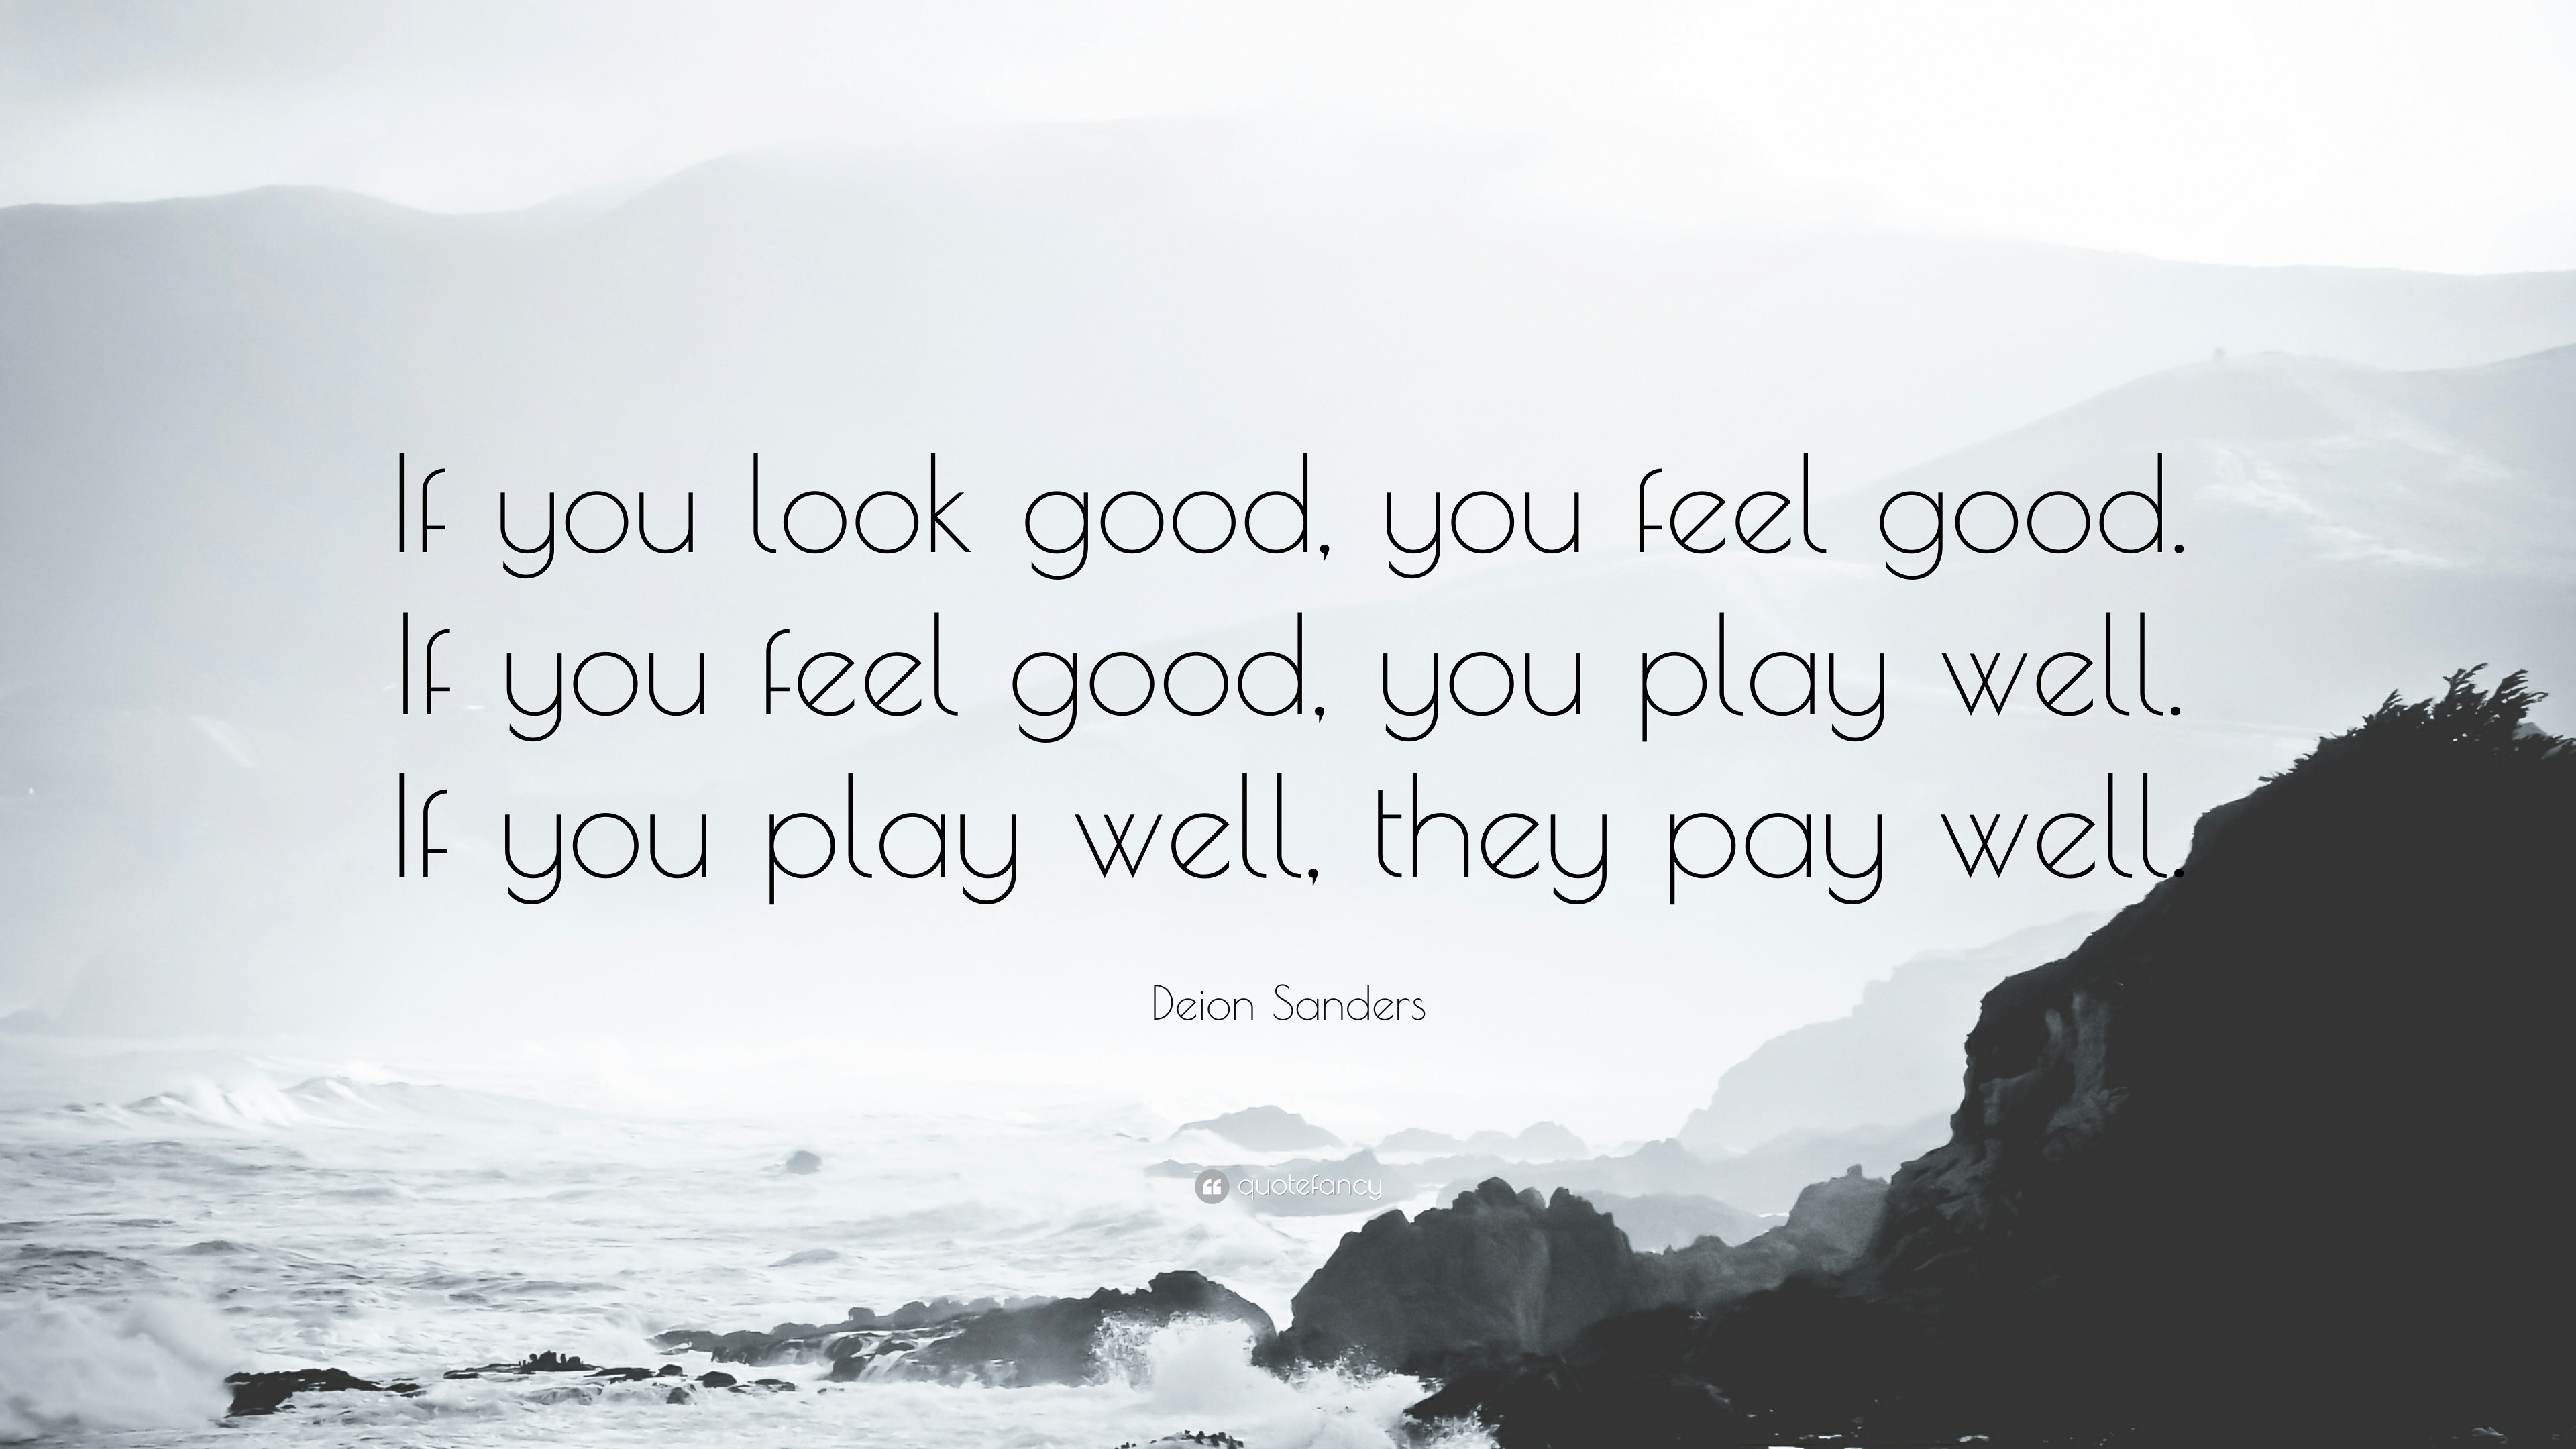 Deion Sanders Quote: “If you look good, you feel good, If you feel good,  you play